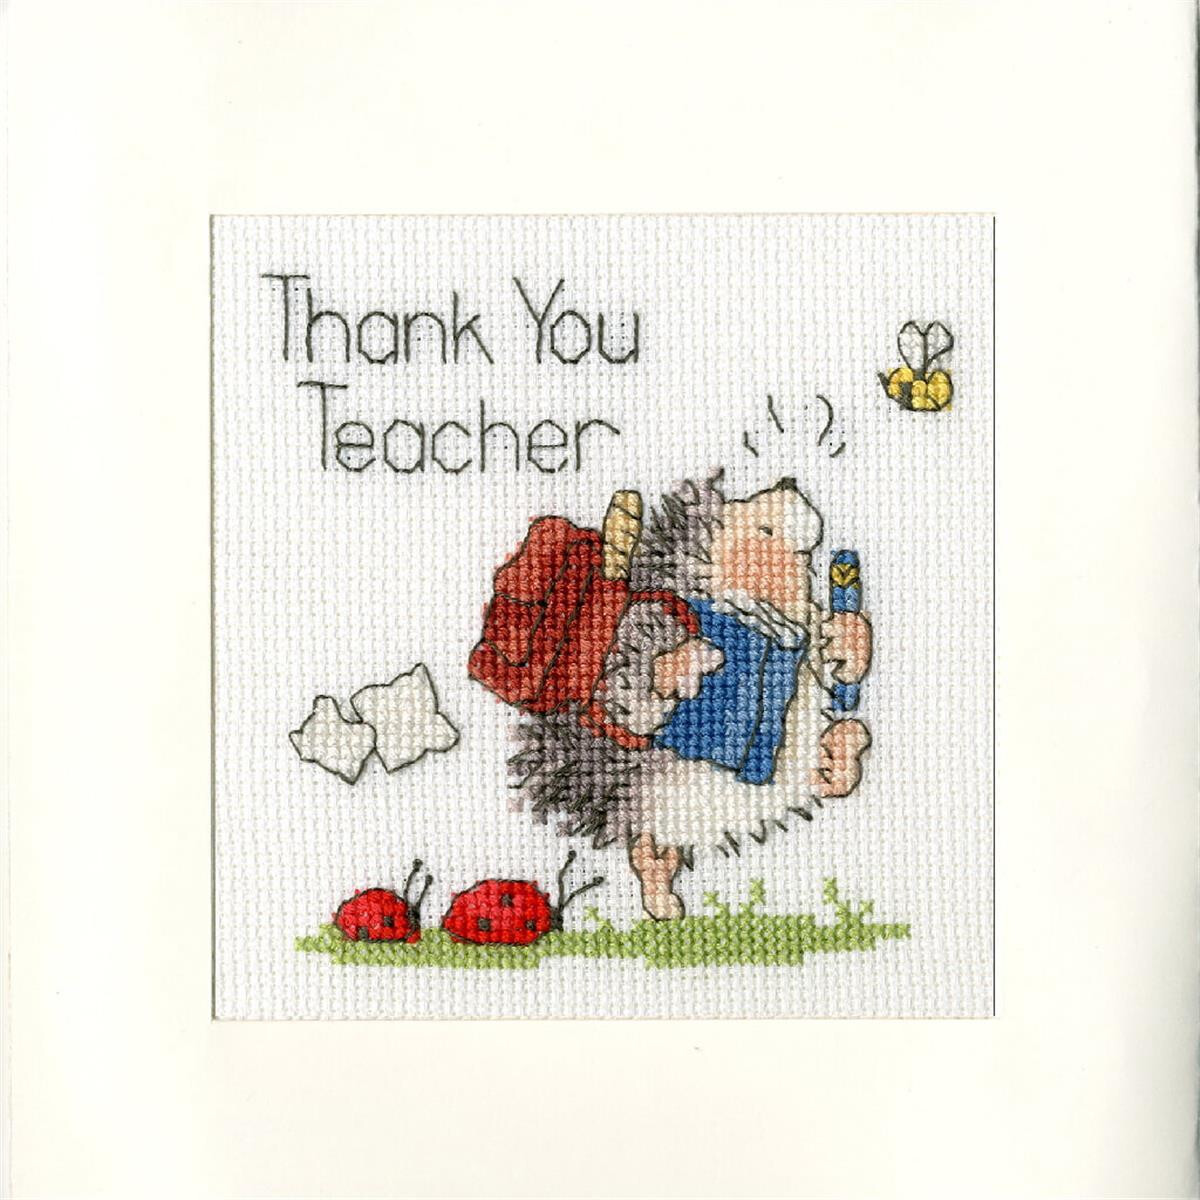 An adorable embroidery pack with a hedgehog holding a...